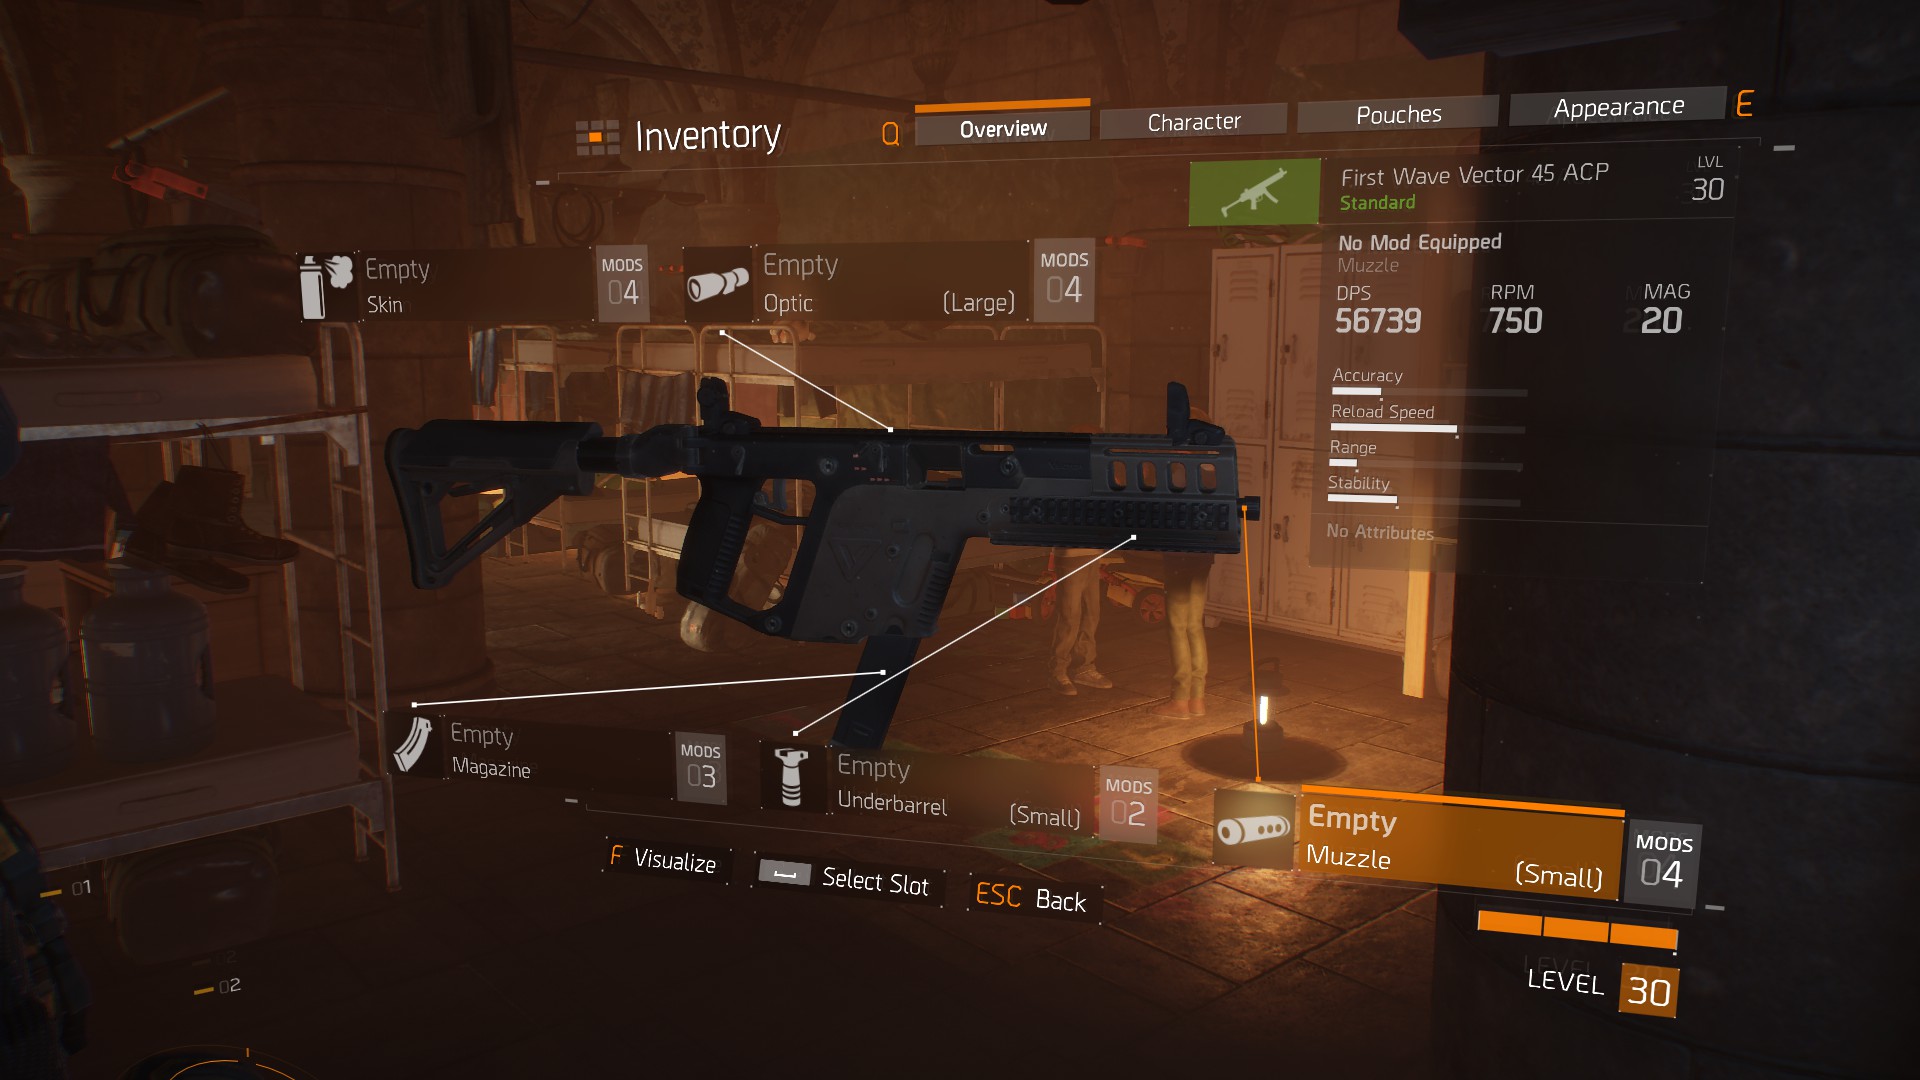 First Wave Vector 45 ACP